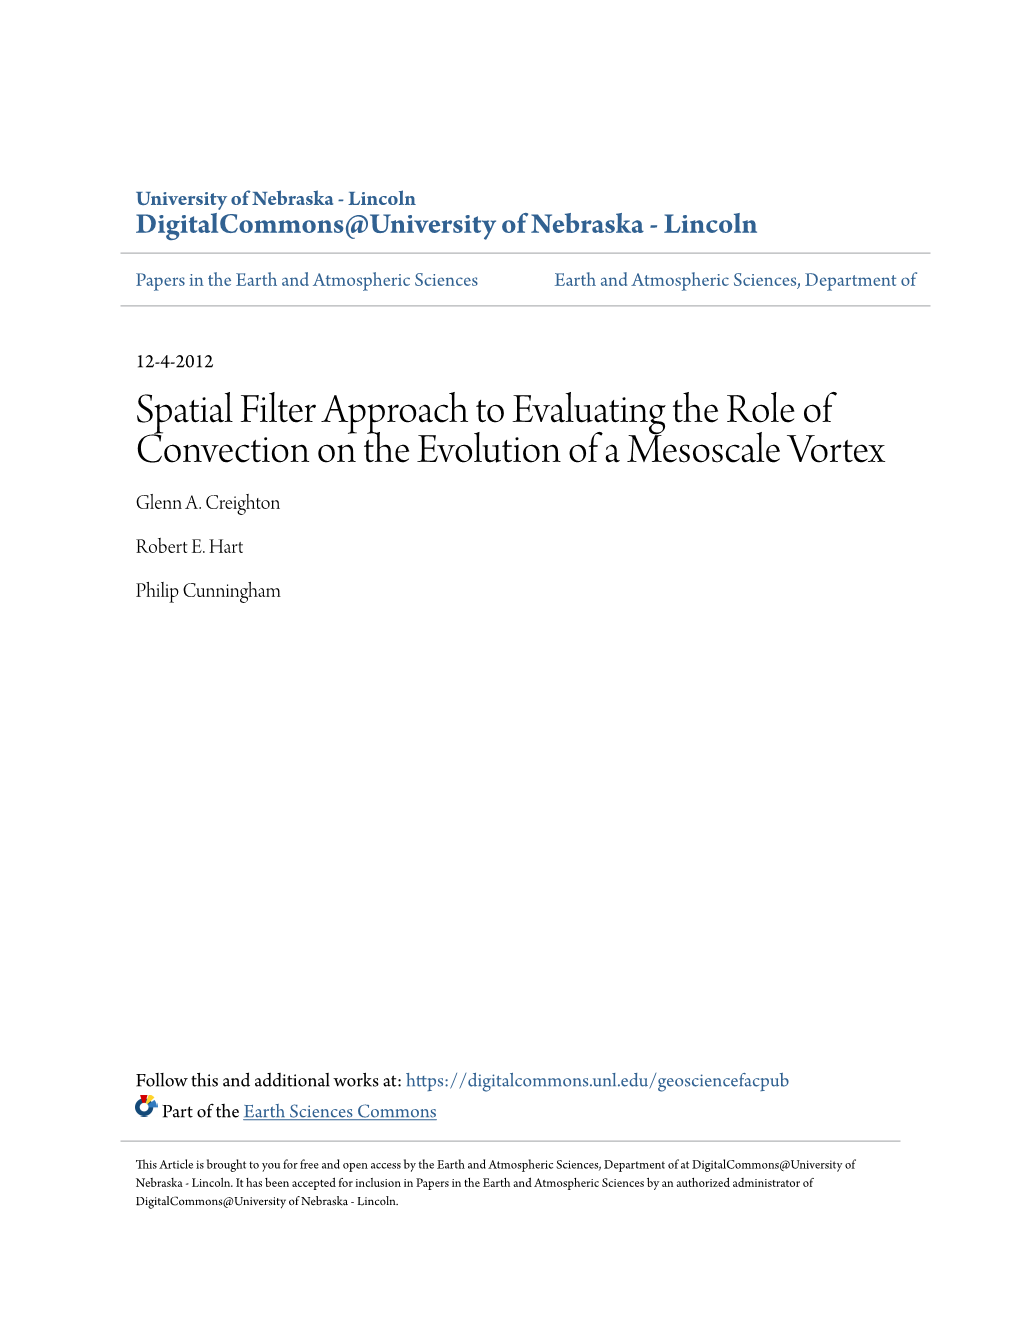 Spatial Filter Approach to Evaluating the Role of Convection on the Evolution of a Mesoscale Vortex Glenn A